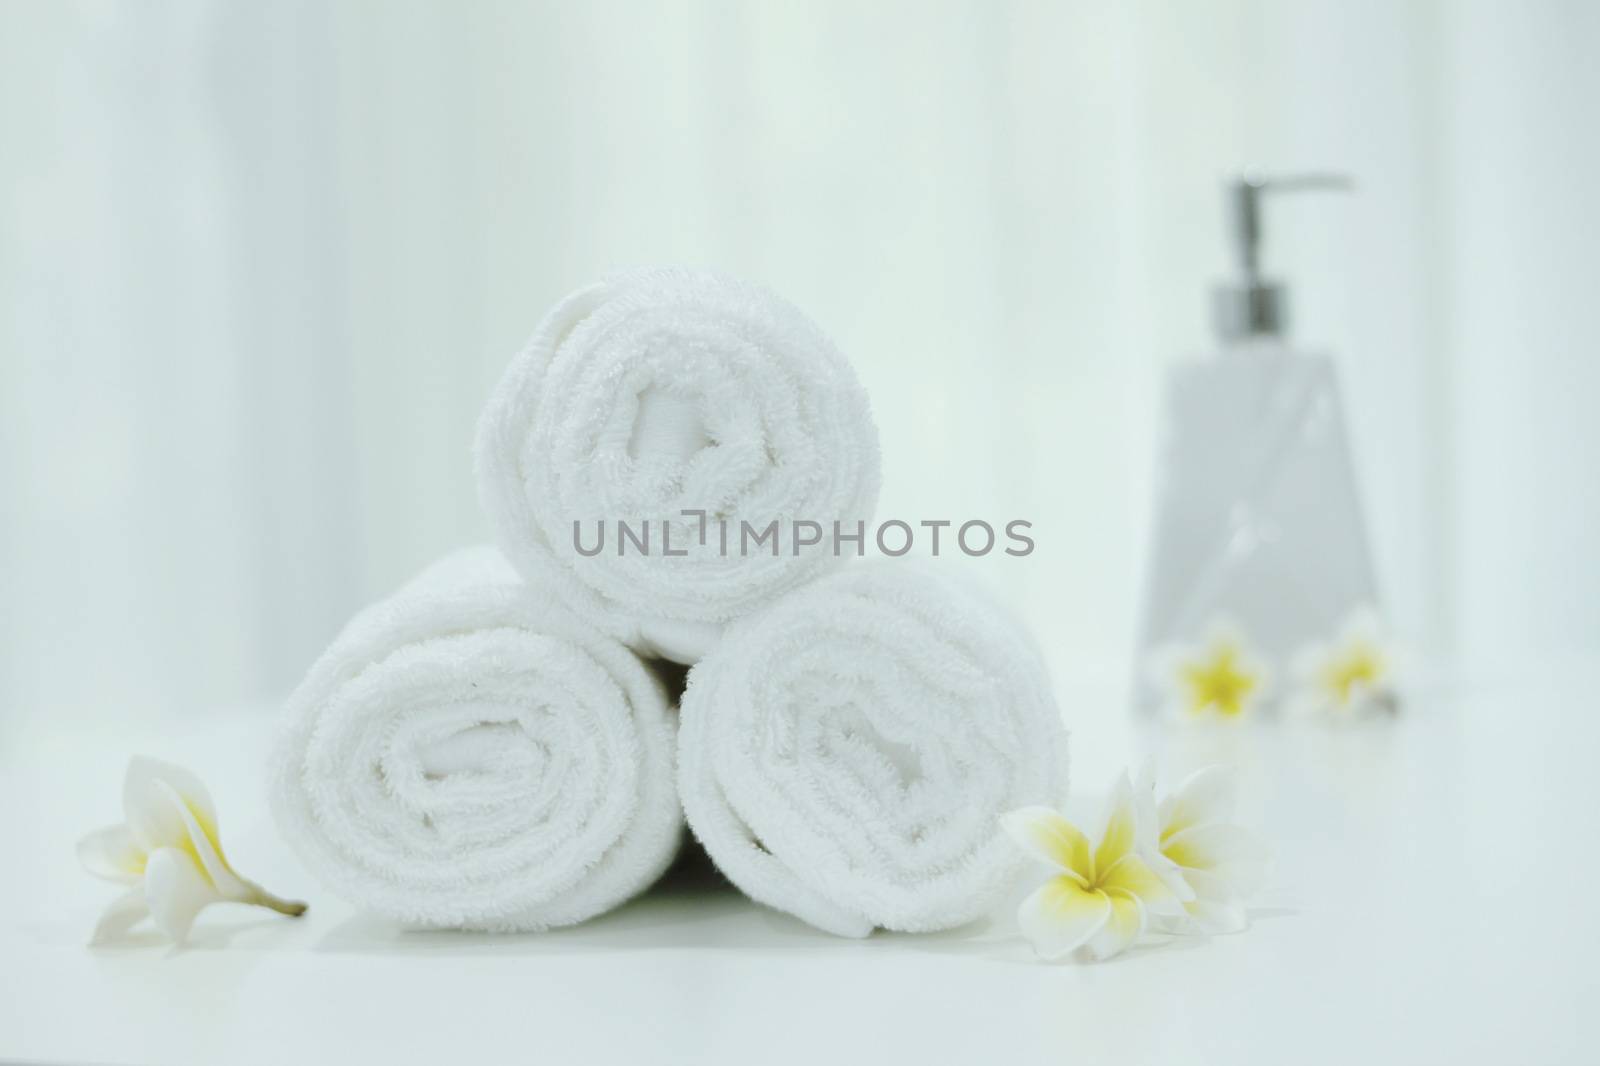 Roll up white towels in the basket on the table. by BirdKS